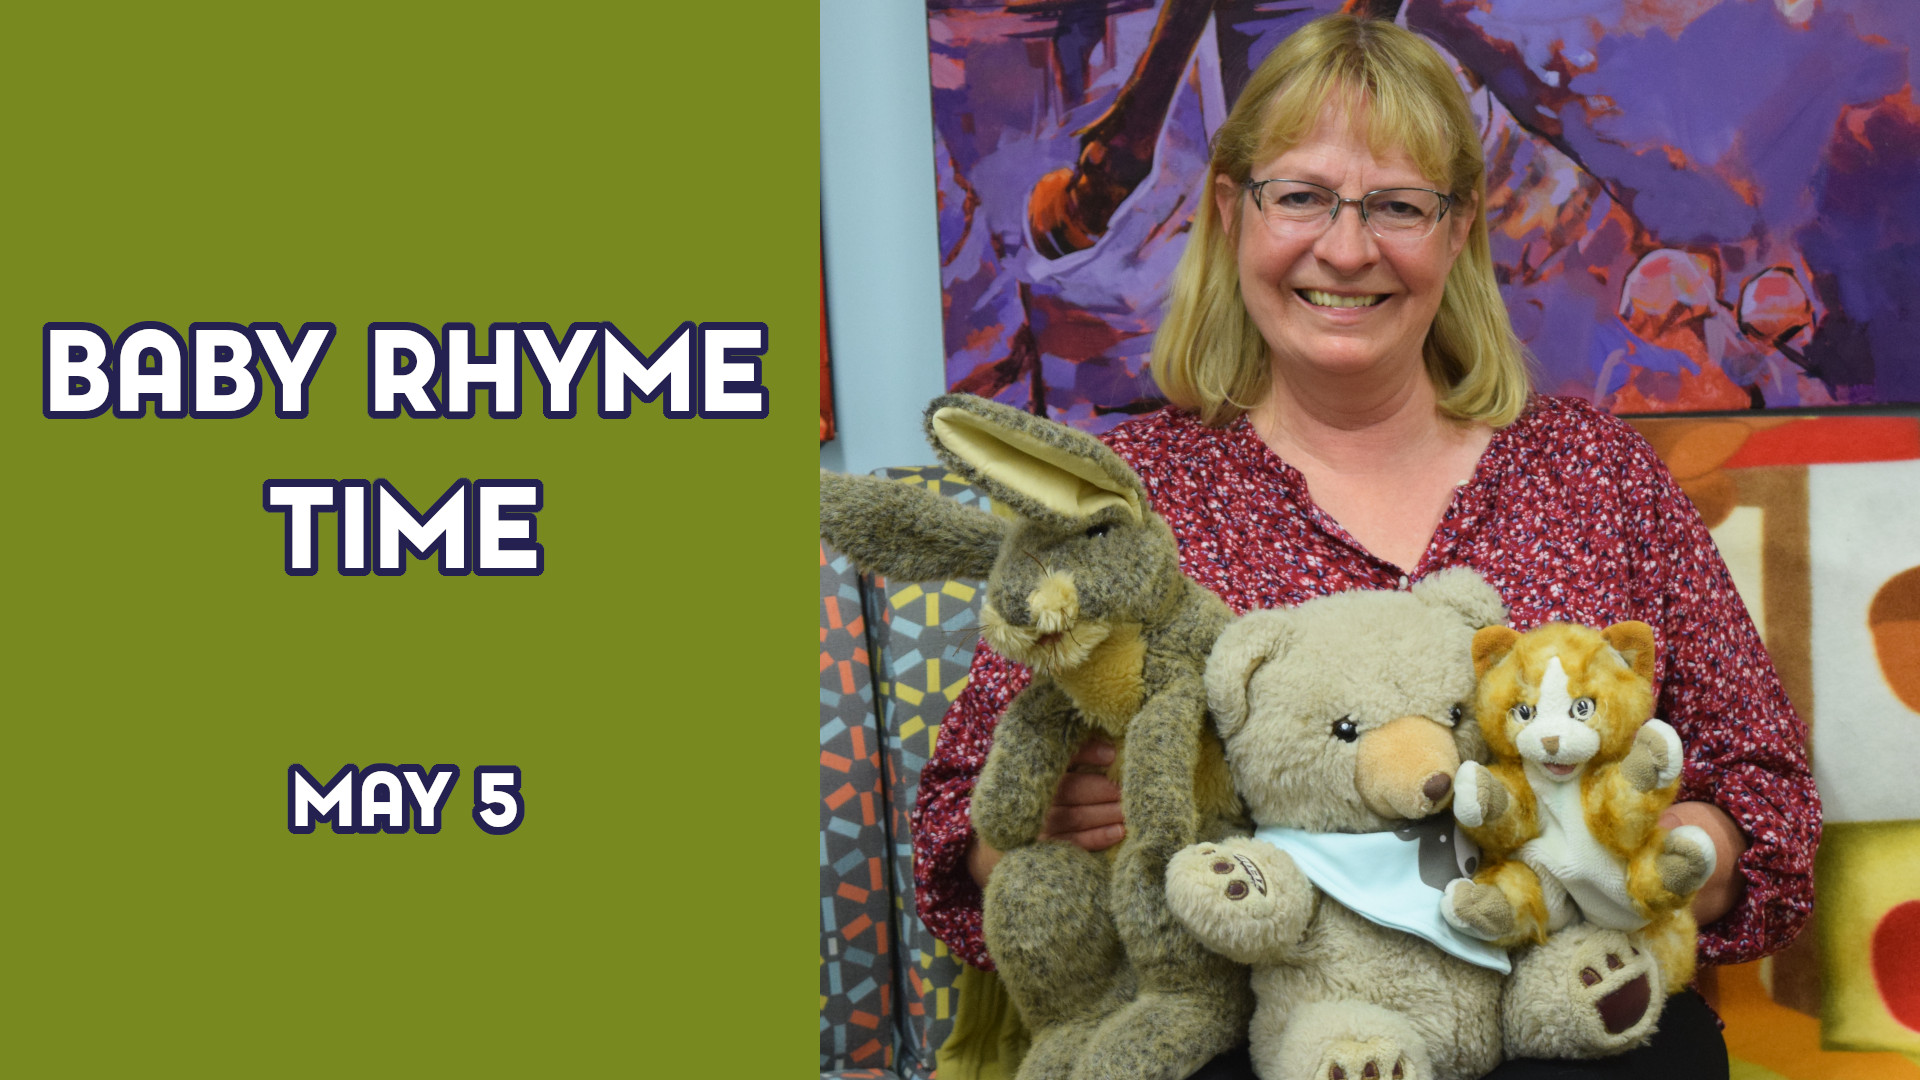 A woman holds stuffed animals next to the text "Baby Rhyme Time May 5"